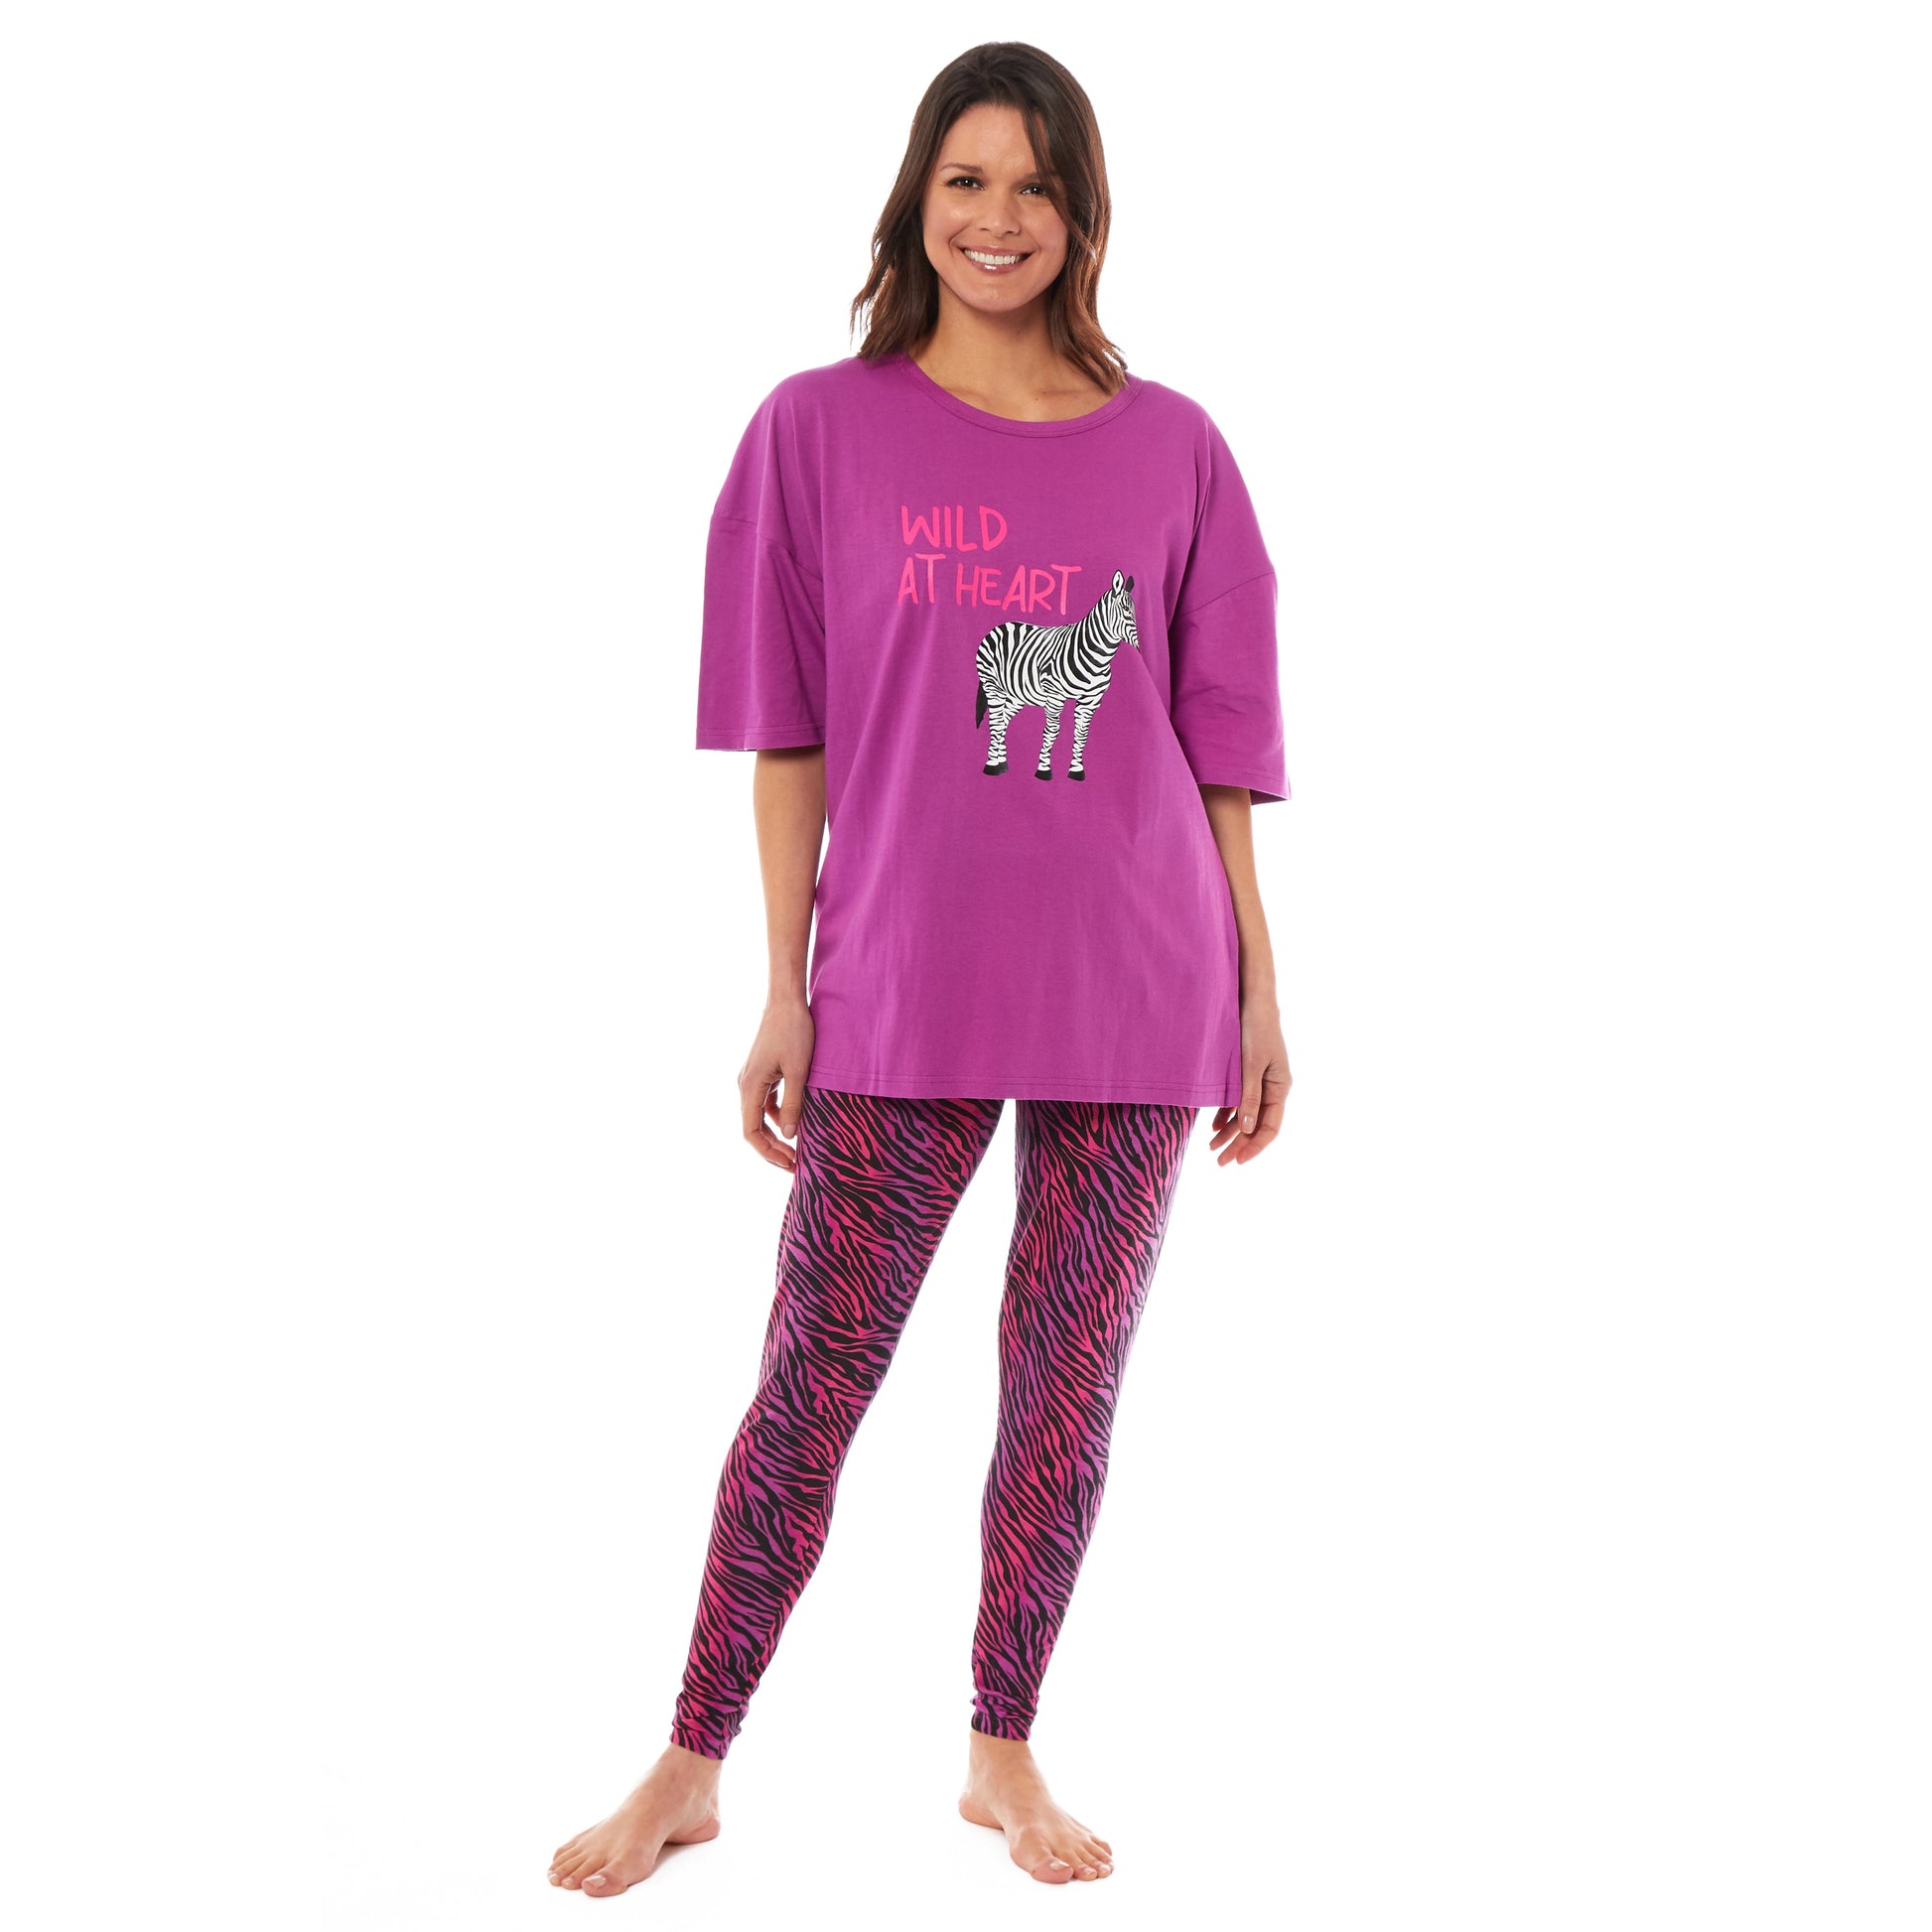 Ladies Oversized Cotton T-Shirt and Leggings PJ Set with Giraffe and Zebra Prints Comfortable and Stylish Womens Loungewear by Daisy Dreamer. Buy now for £13.00. A Pyjamas by Daisy Dreamer. _Hi_chtgptapp_optimised_this_description-generator,_Hi_chtgptapp_